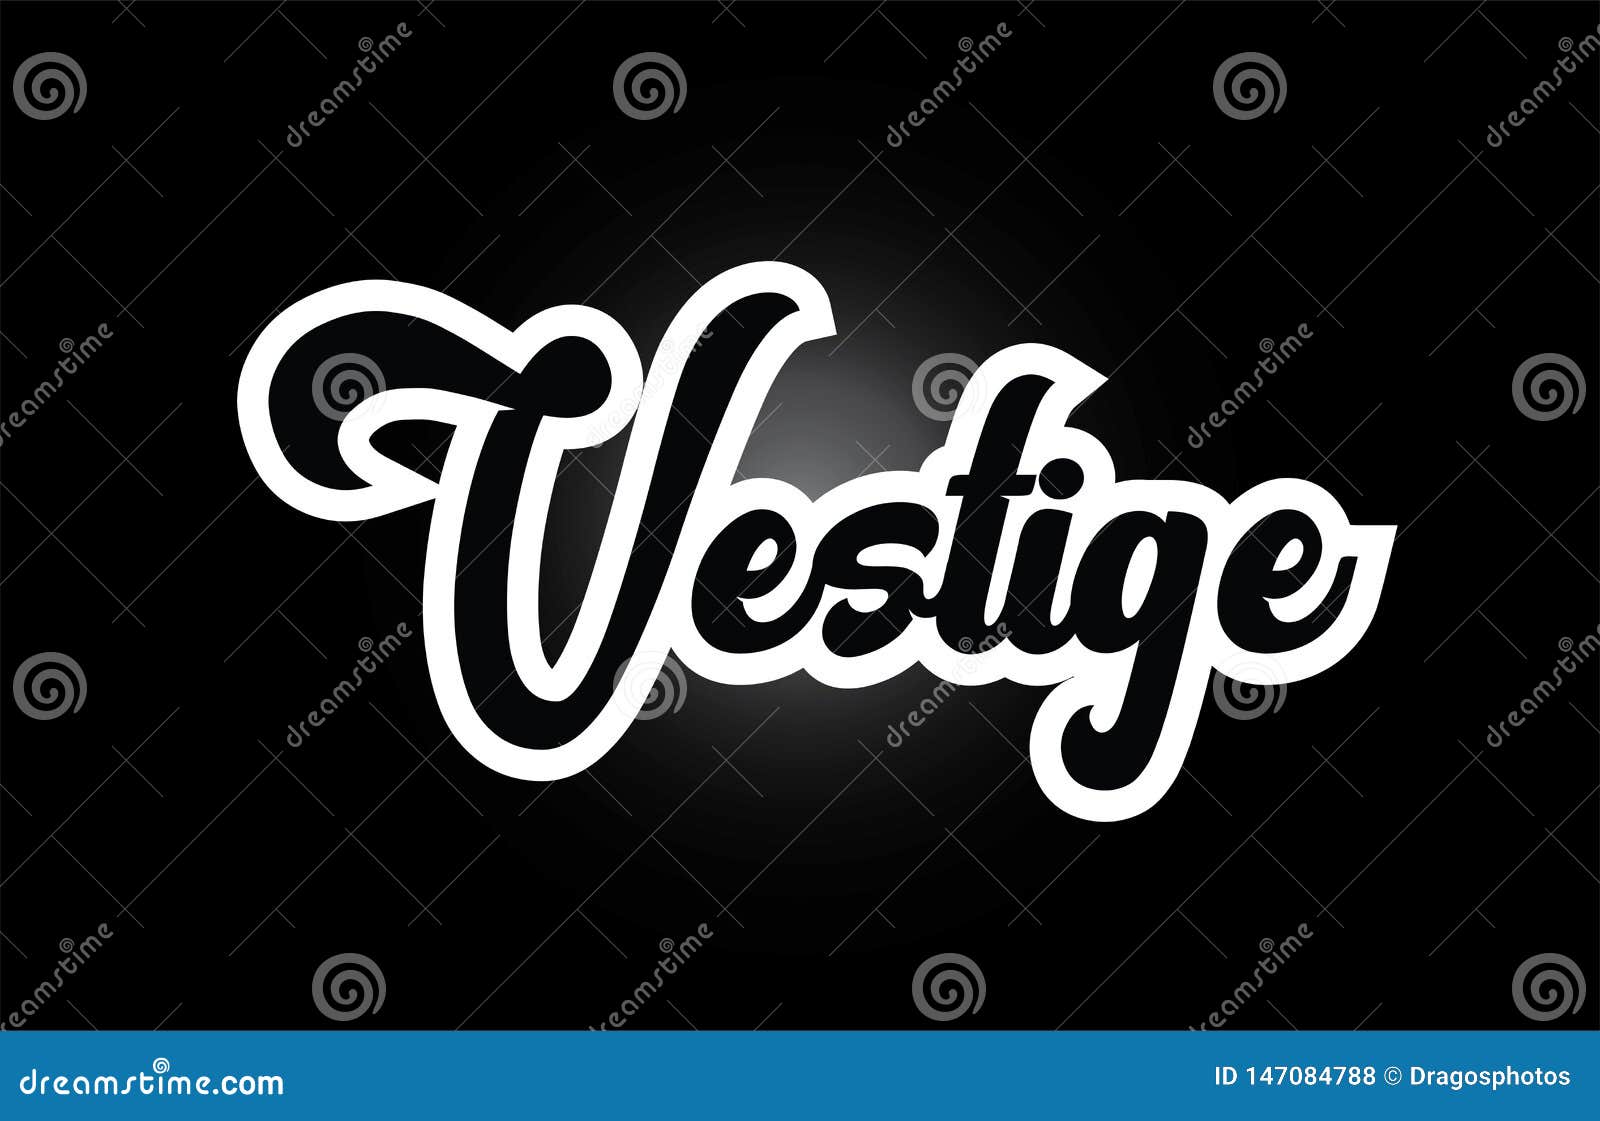 black and white vestige hand written word text for typography logo icon 